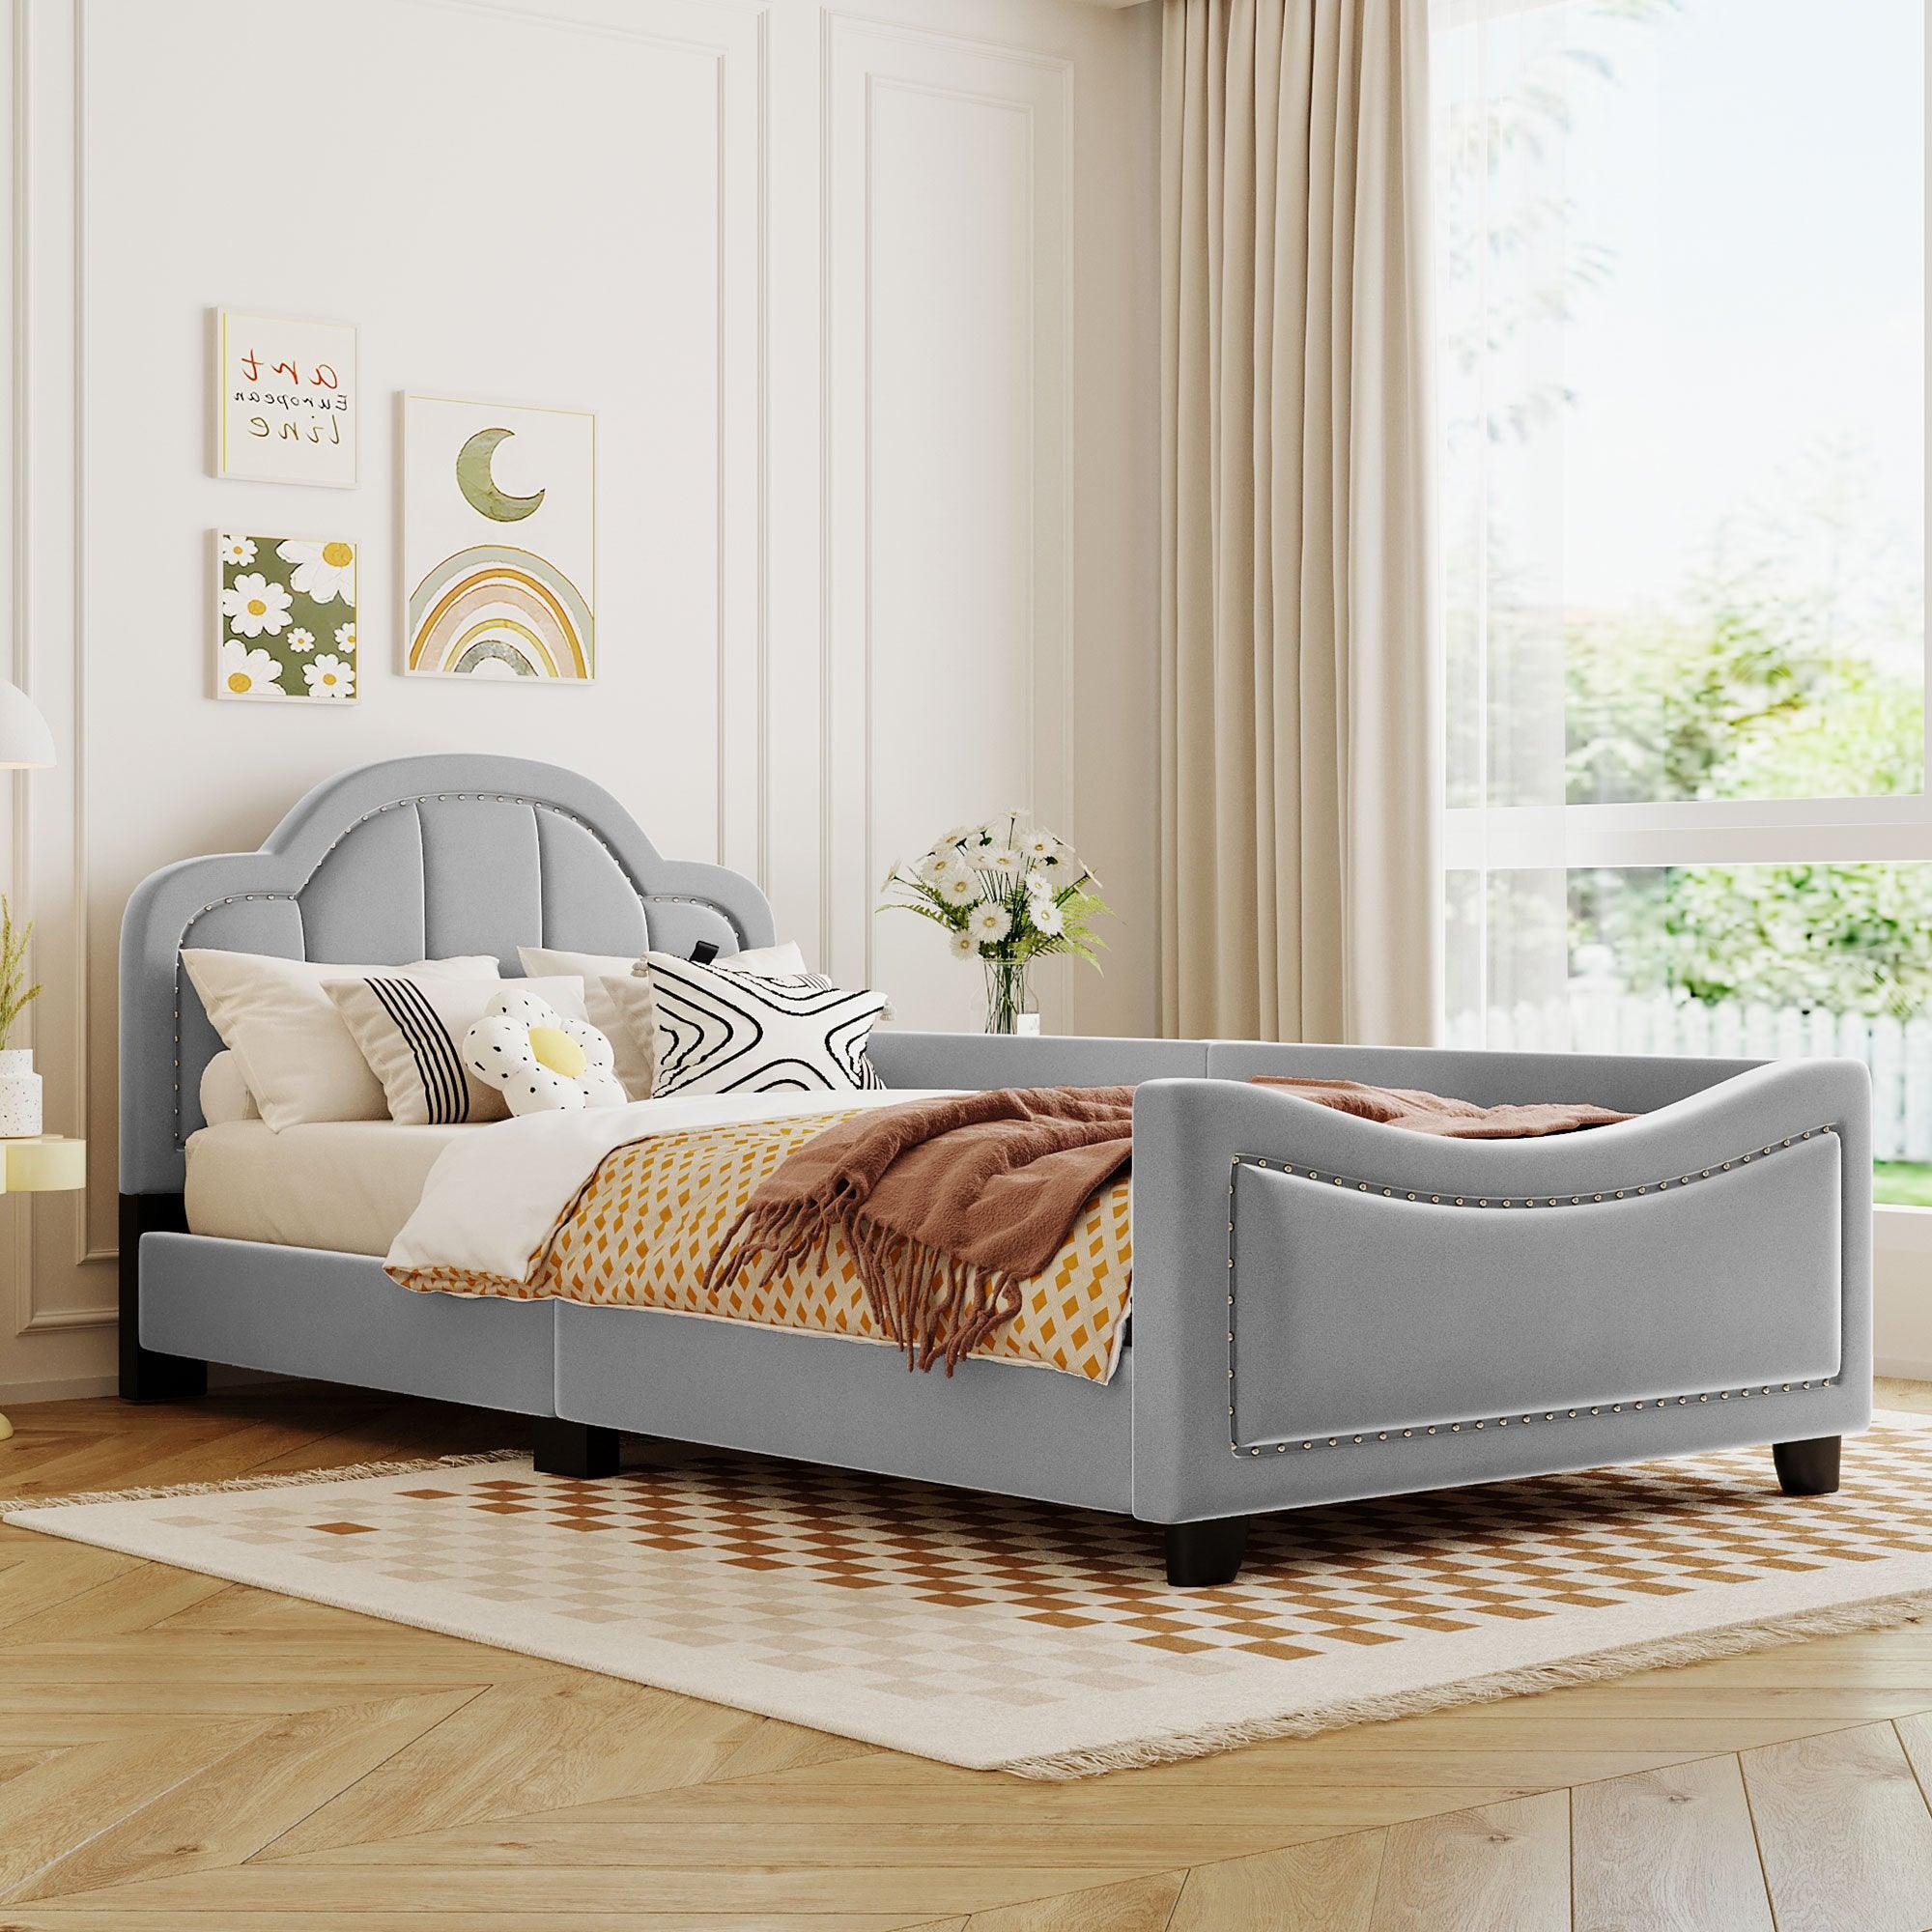 🆓🚛 Twin Size Upholstered Daybed With Cloud Shaped Headboard, Embedded Elegant Copper Nail Design, Gray